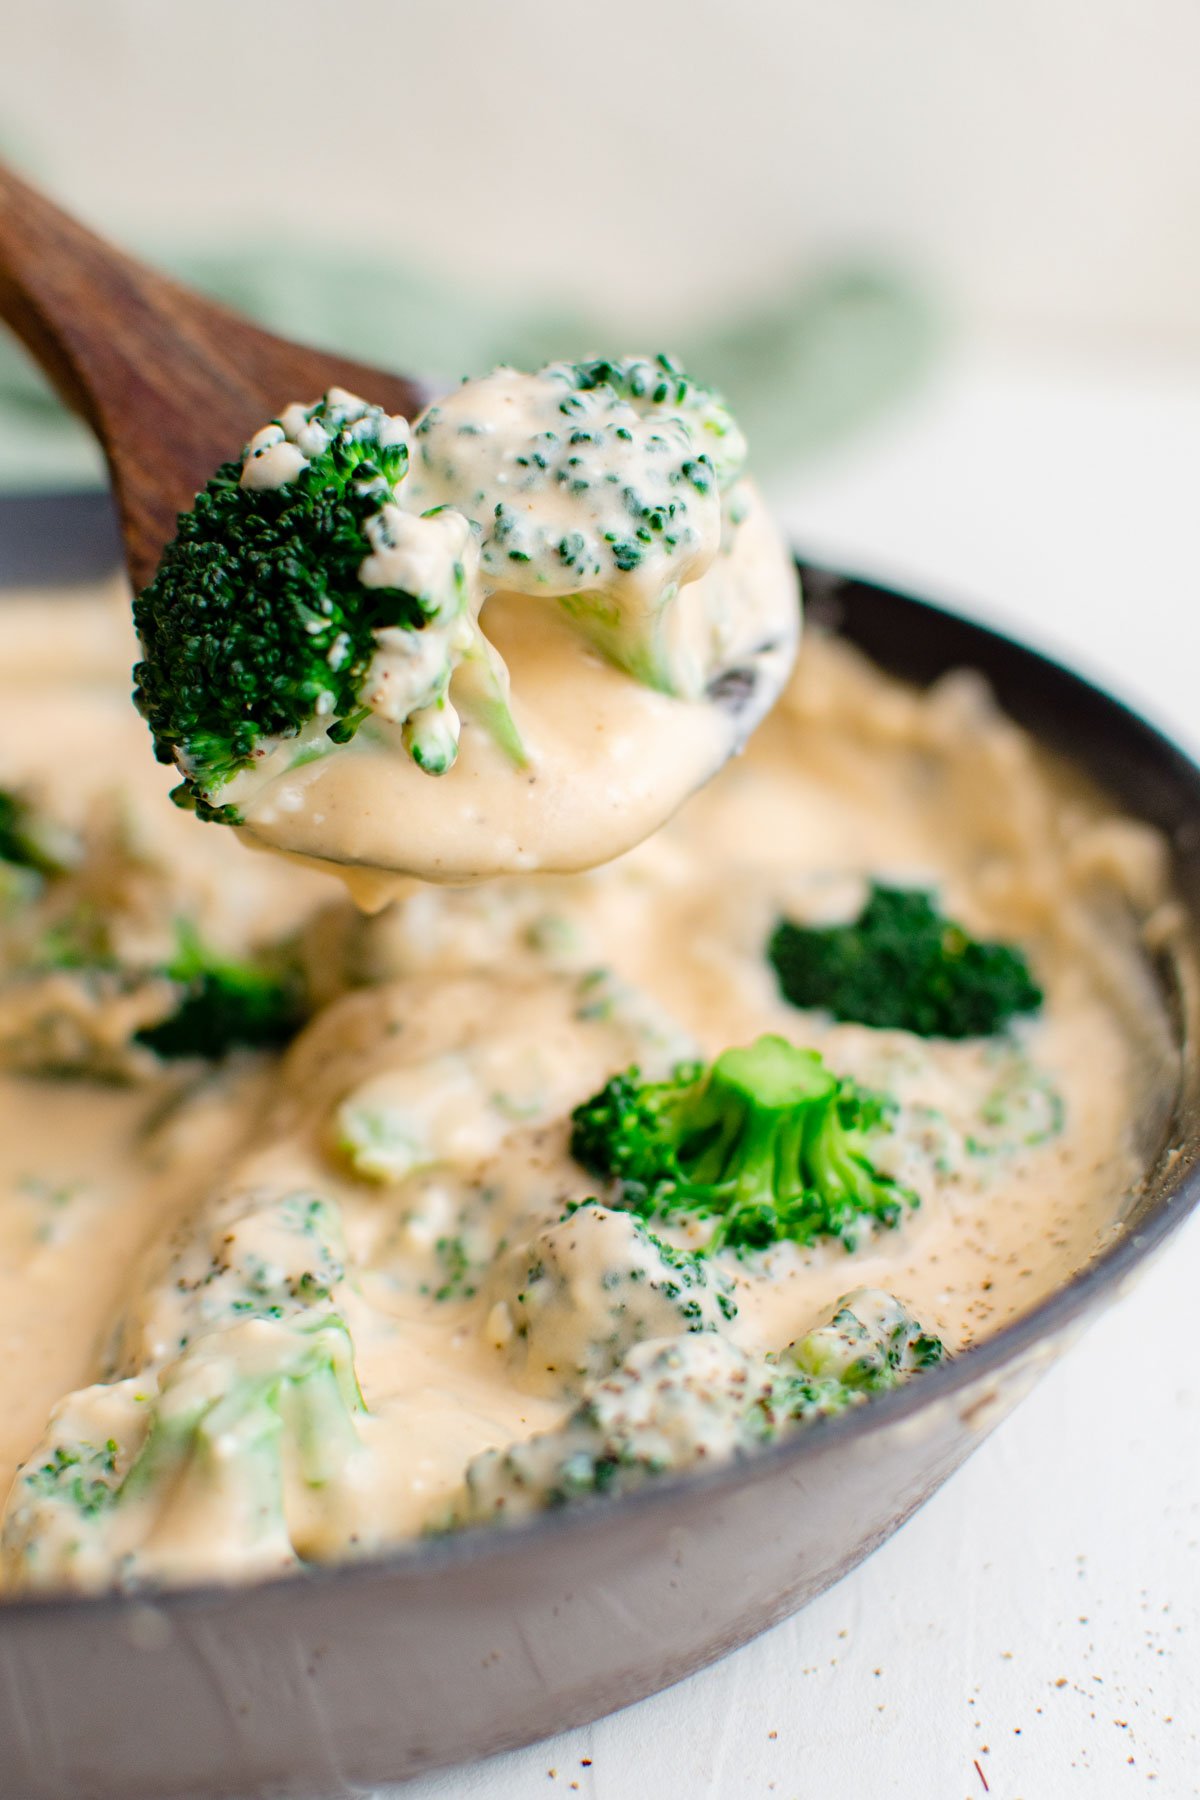 skillet with cheese sauce, broccoli, wood spoon